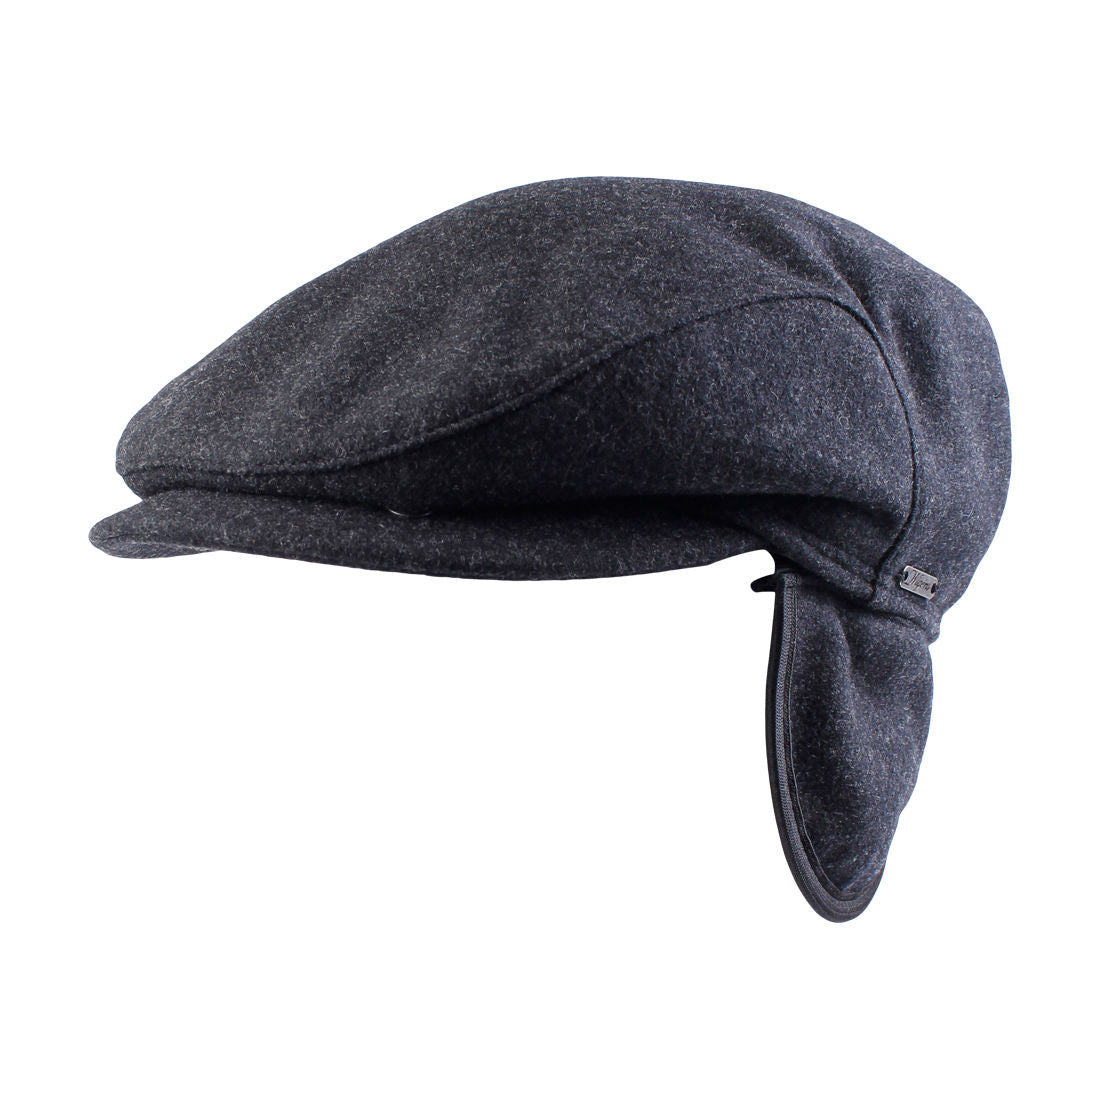 Melton Wool Ivy Vintage Cap with Earflaps (Choice of Colors) by Wigens